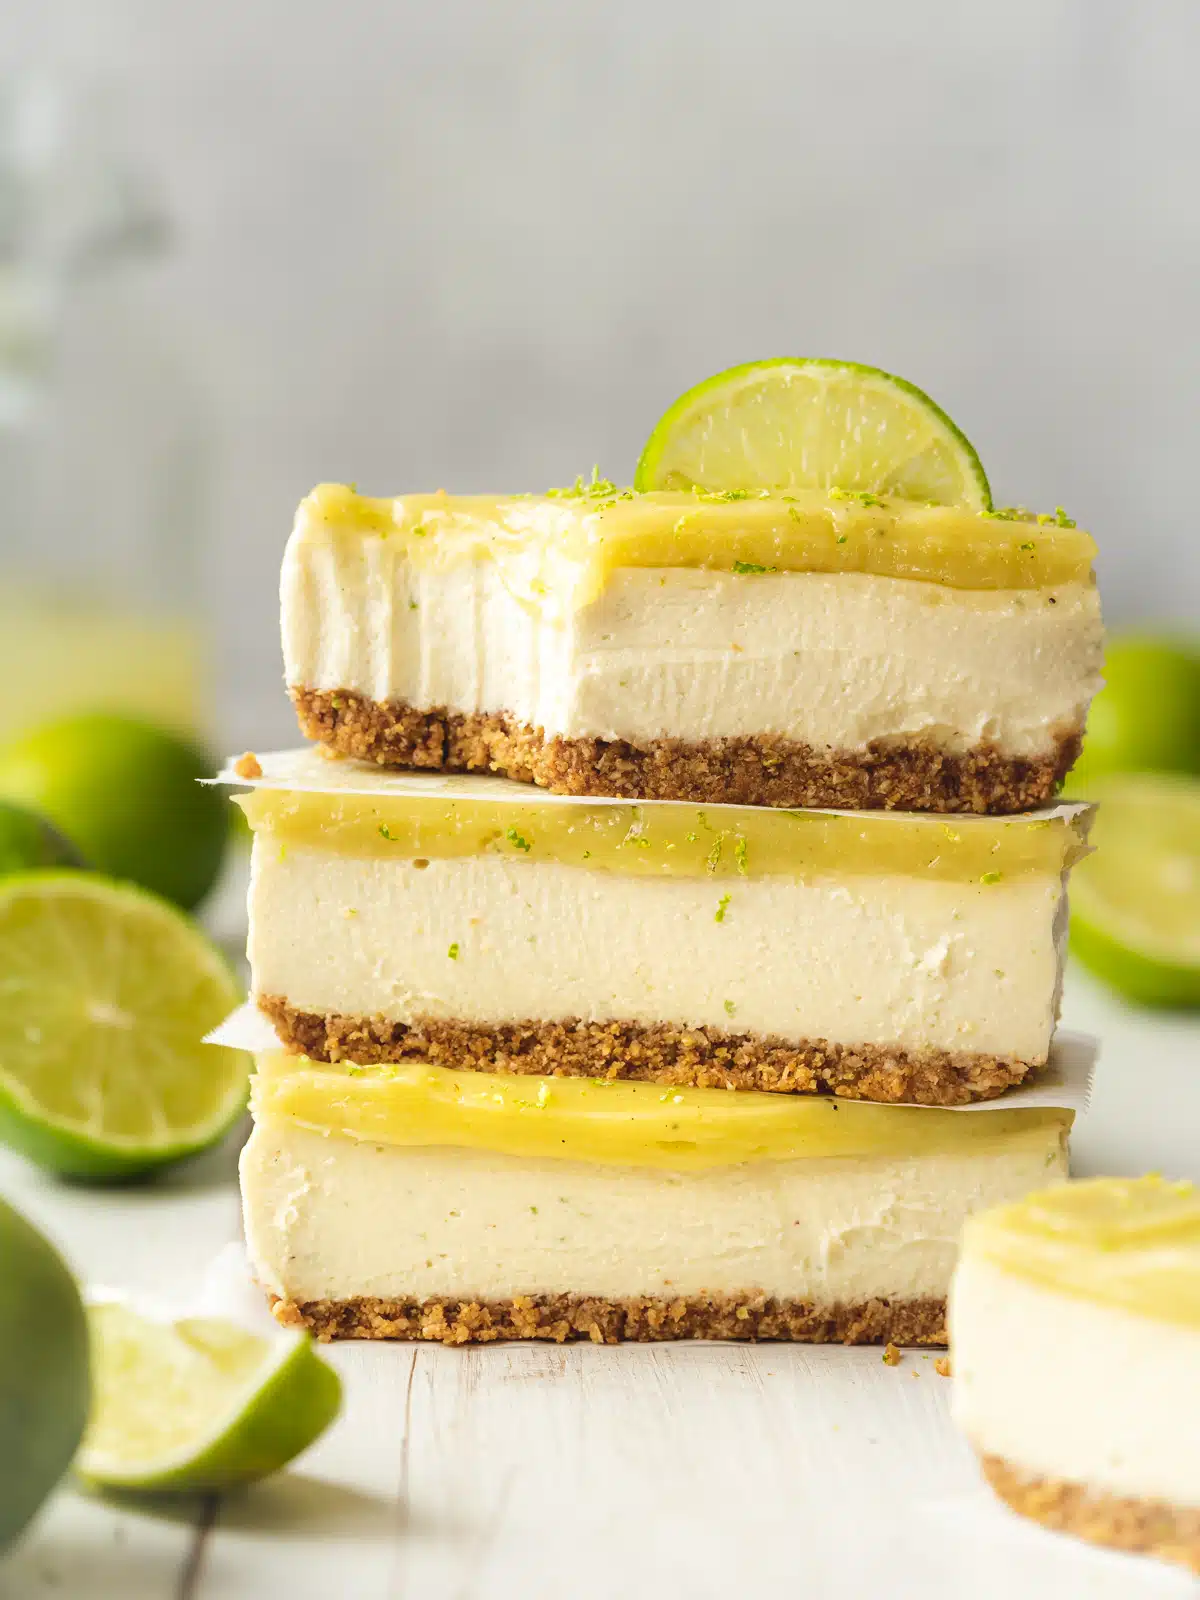 a stack of vegan lime cheesecake bars with a lime wedge on top and fresh limes scattered around. There is a bite taken out of the top slice showing the creamy texture.